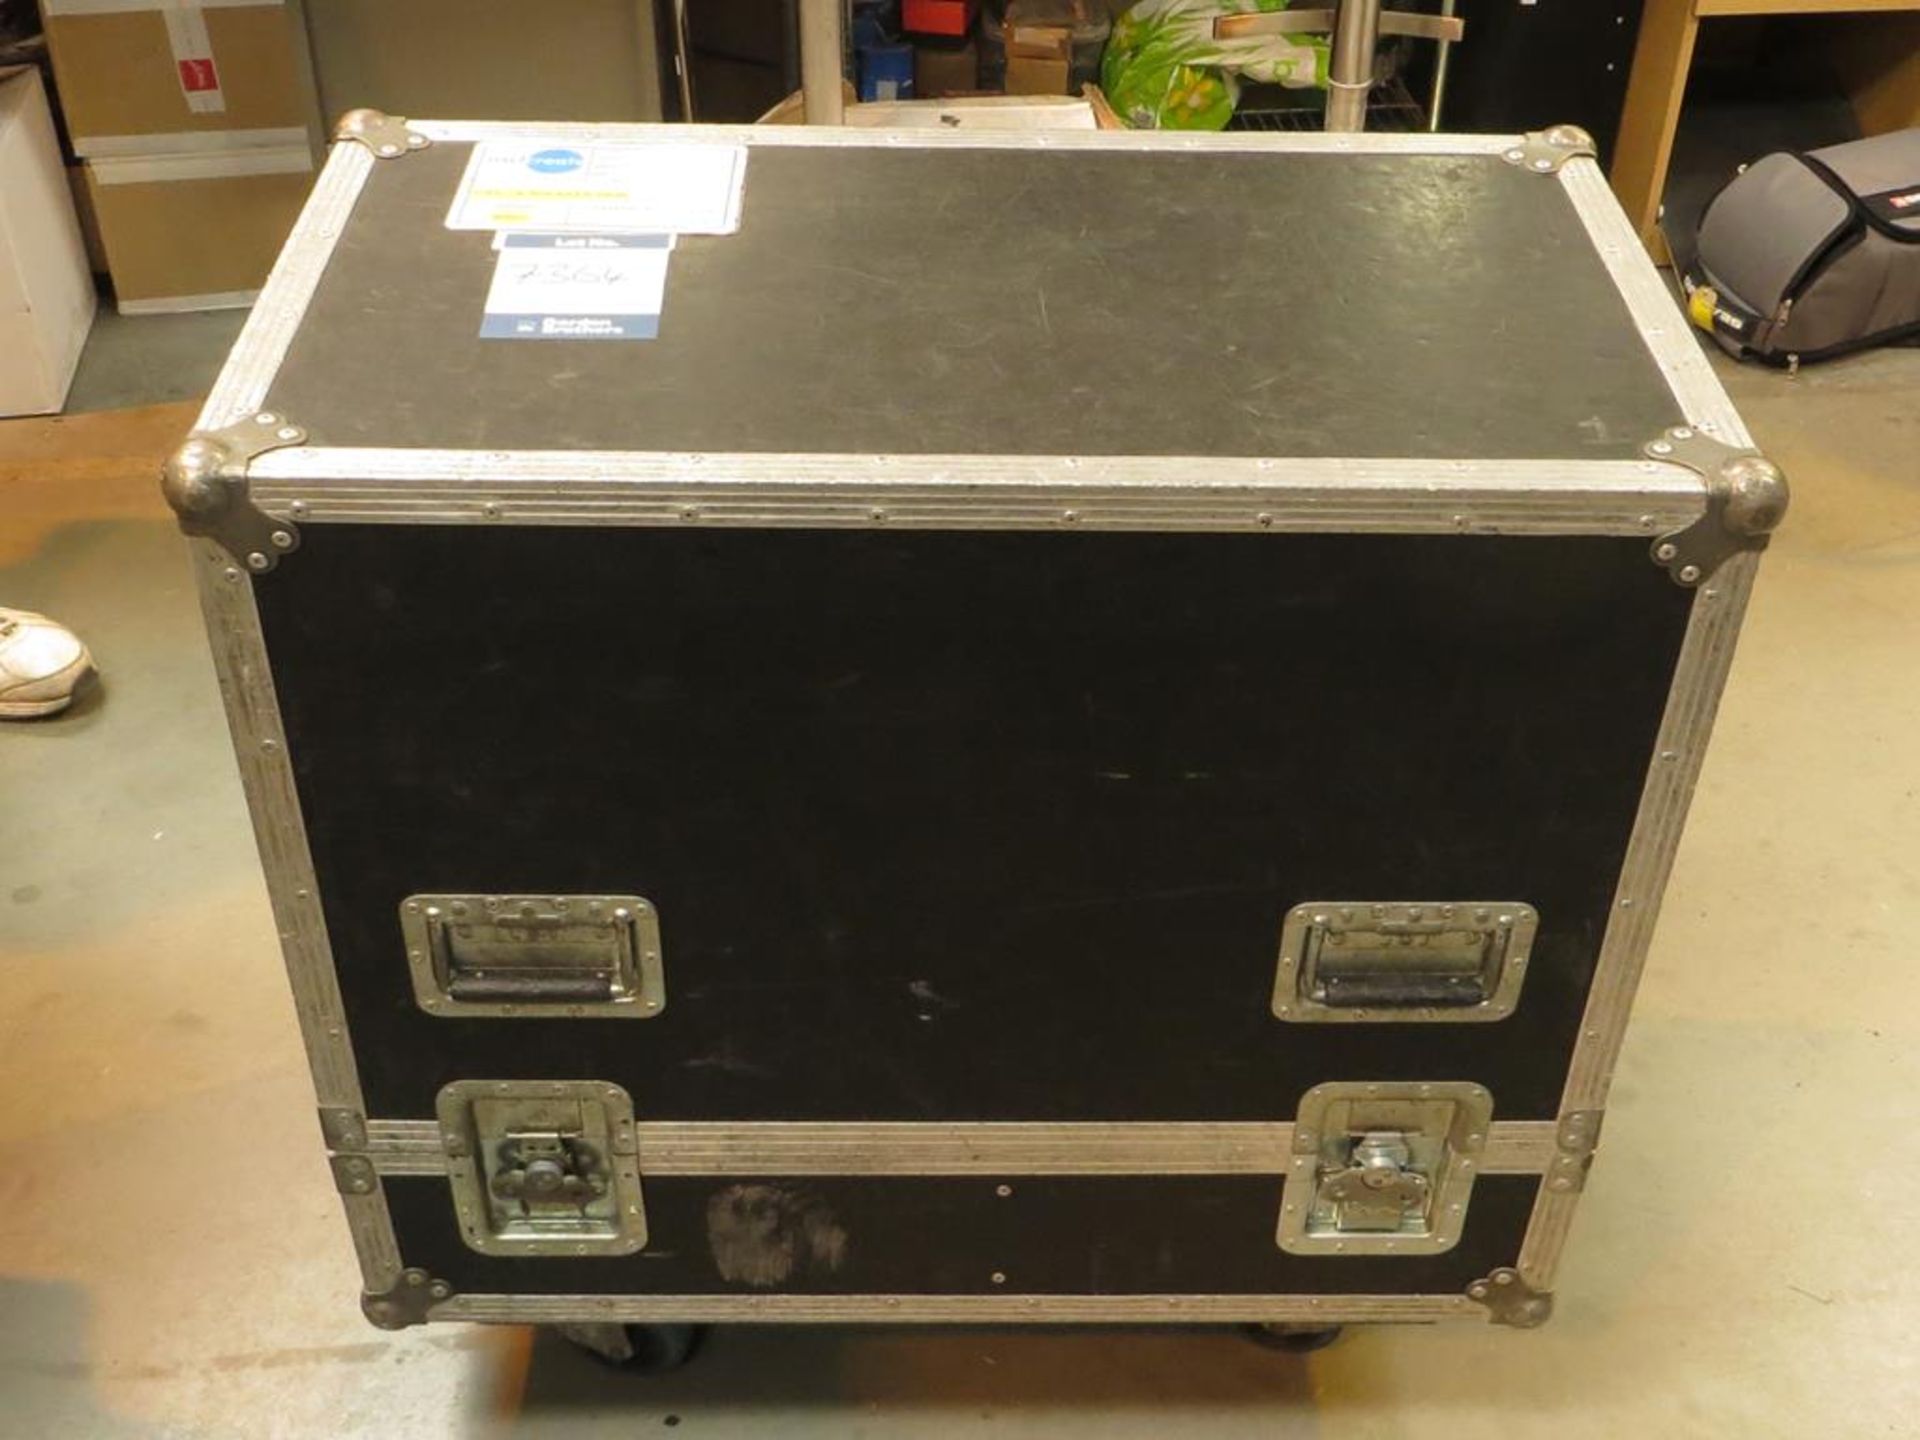 1x No. pair D&B Audiotechnik, C6 speakers with mounting brackets in transit case (can't fly): Unit C - Image 4 of 4